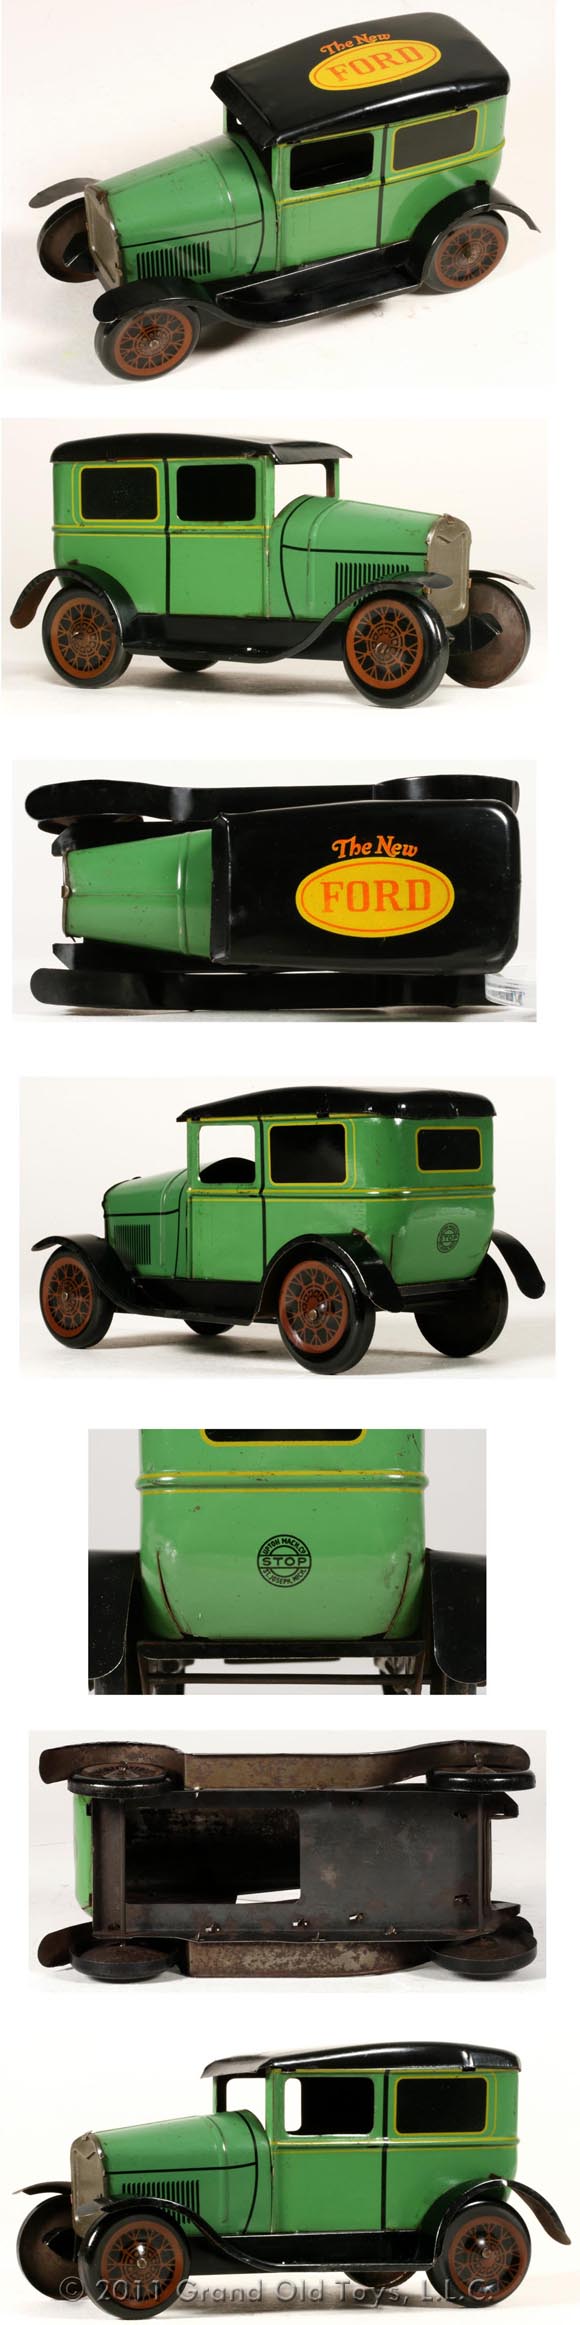 1927 Upton Co. Model A, The New Ford Tinplate Promo